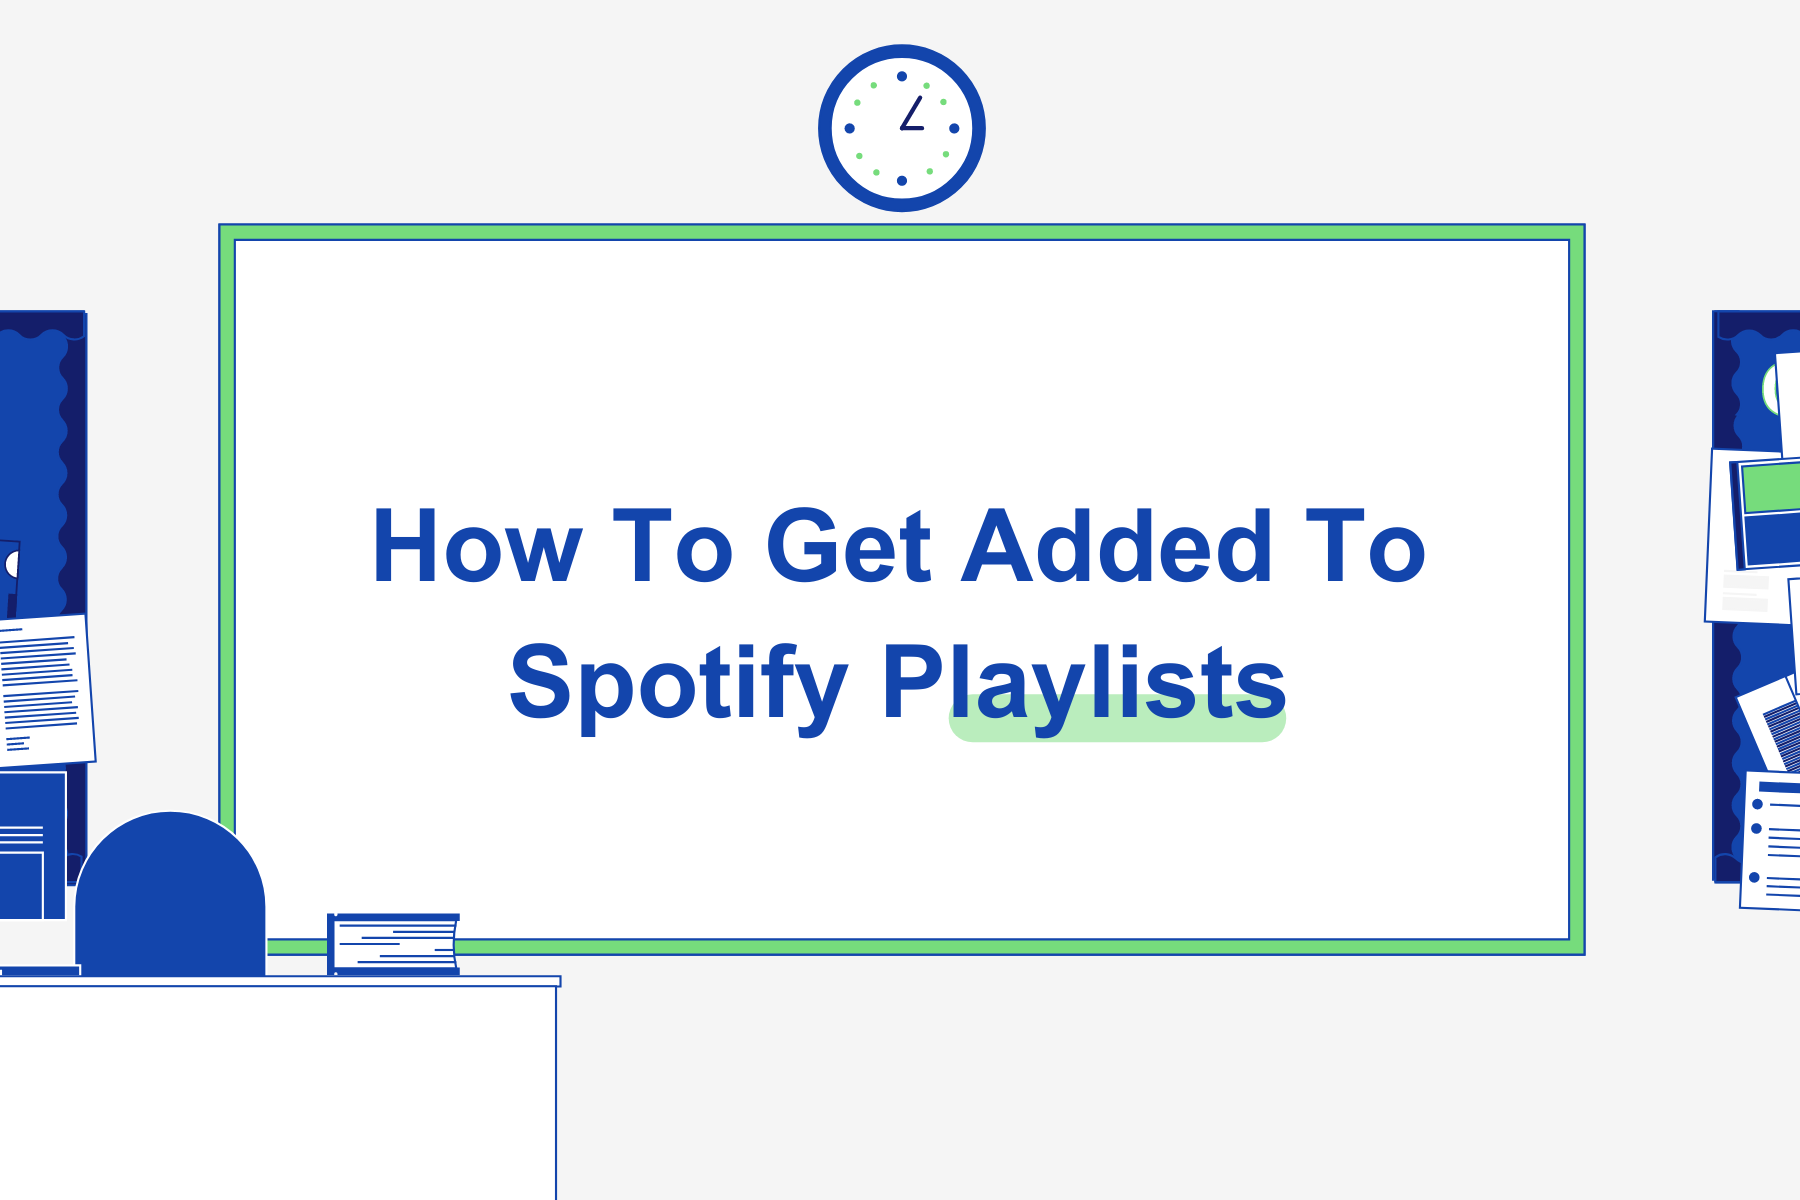 How To Get Added To Spotify Playlists